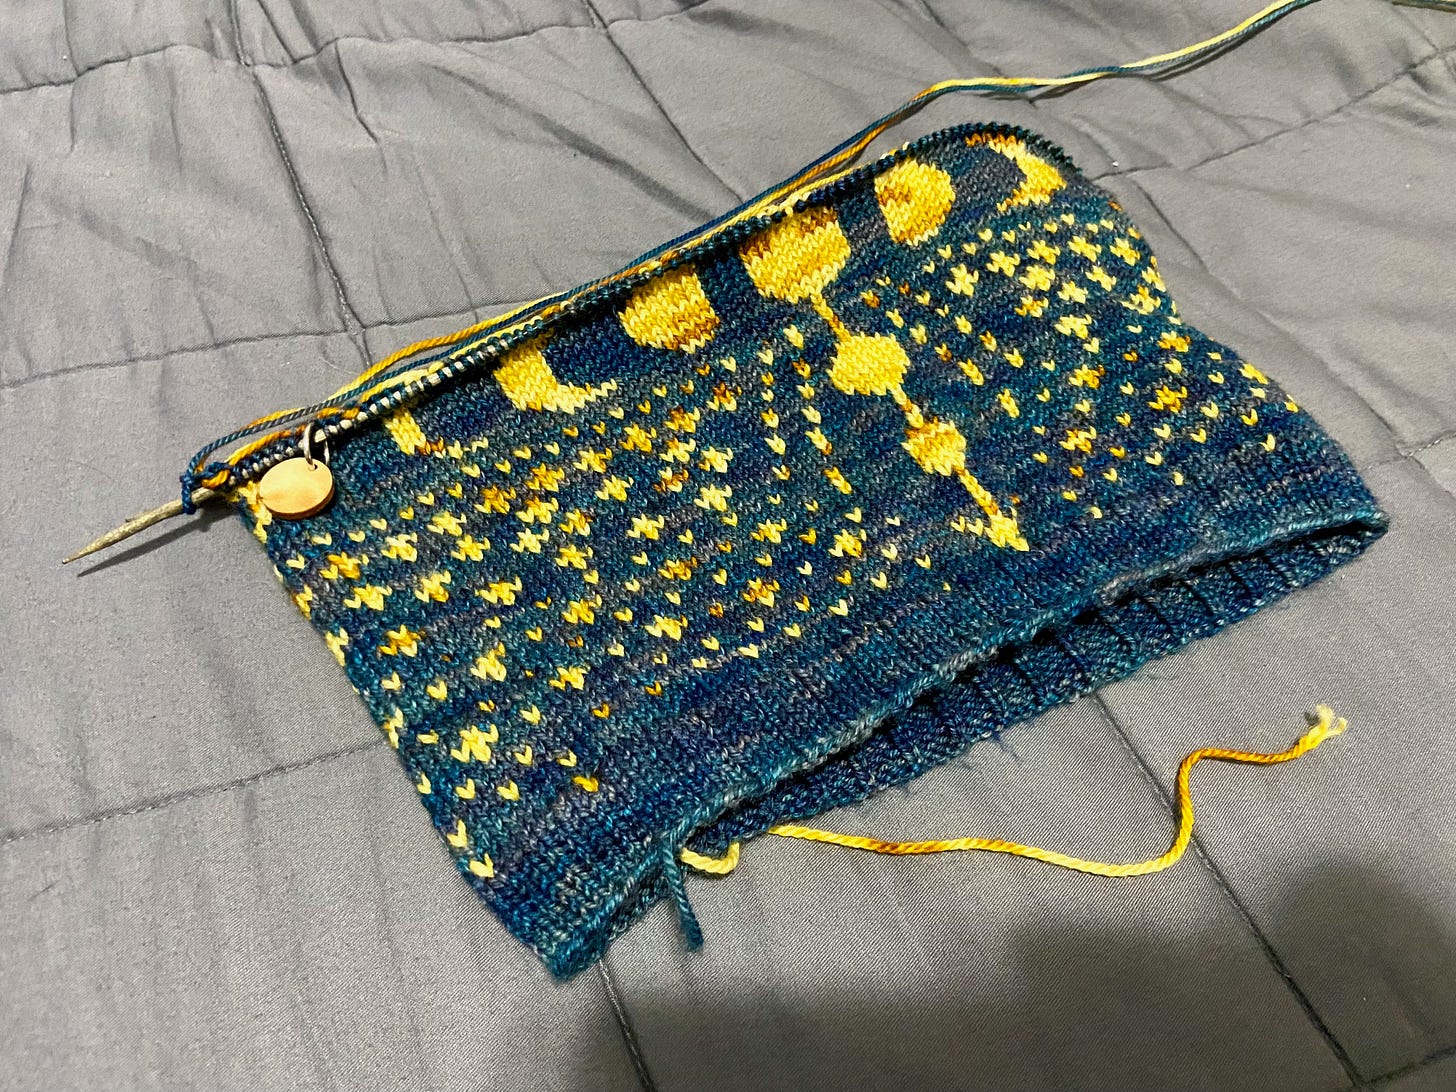 A partially knitted Ixchel Cowl, which features a blue backdrop and yellow stars, moons of varying sizes, and an arrow running down the center.